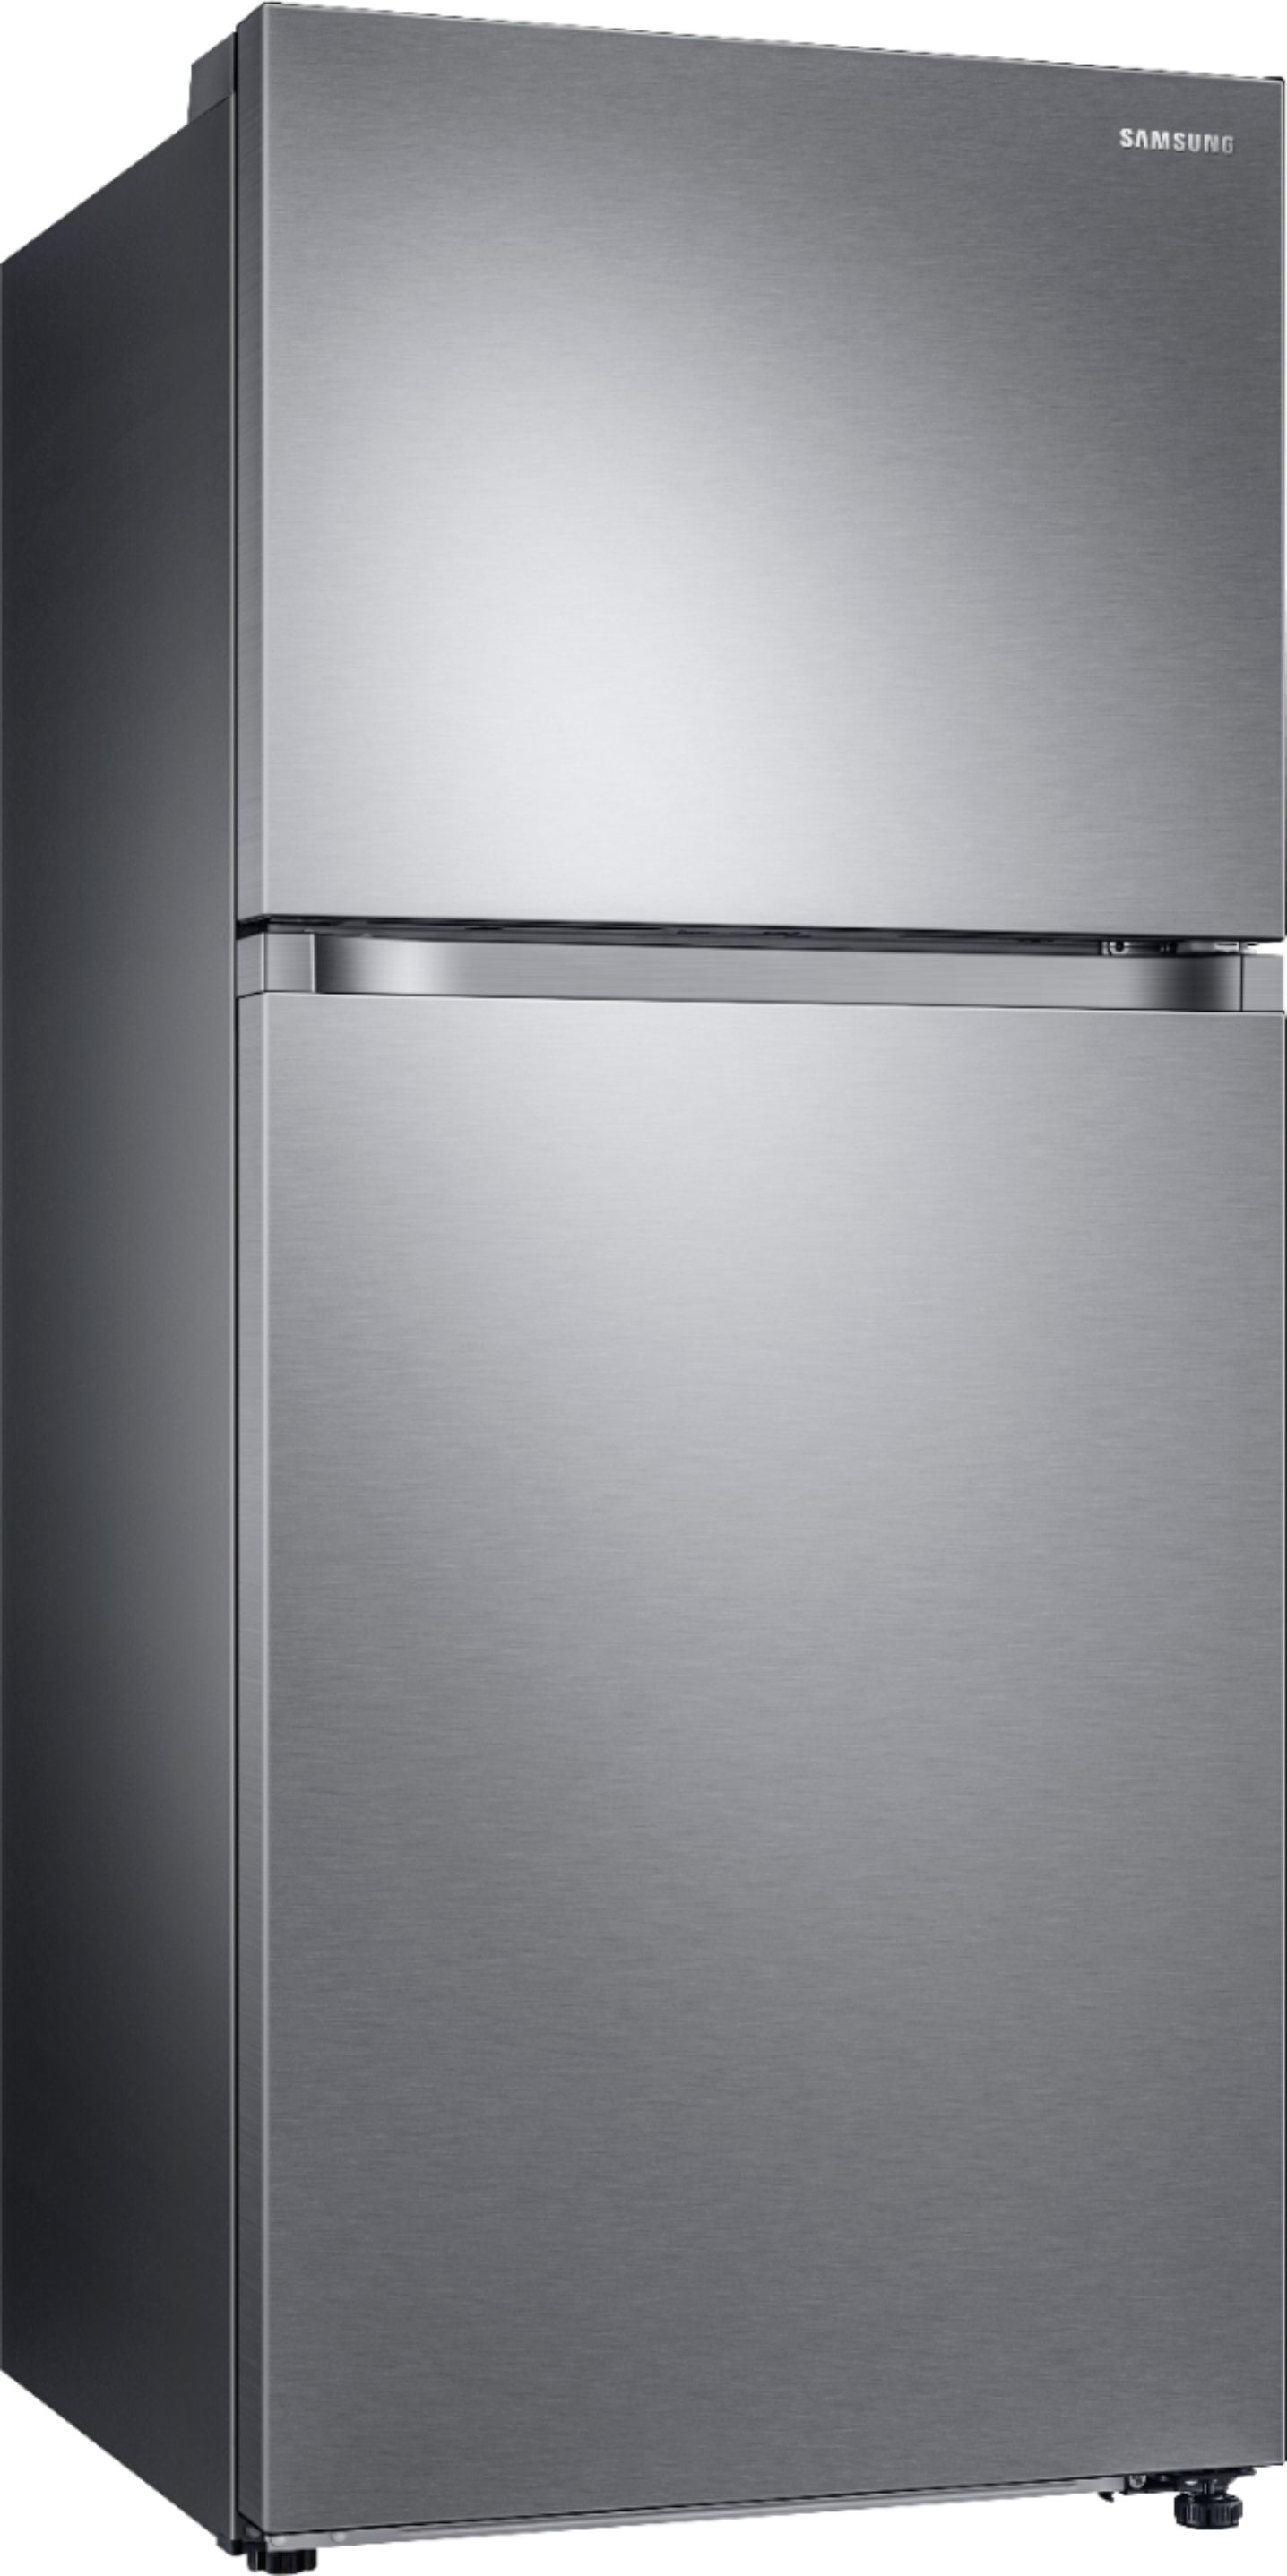 Angle View: Samsung - 17.6 cu. ft. Top-Freezer Refrigerator with FlexZone - Stainless Steel